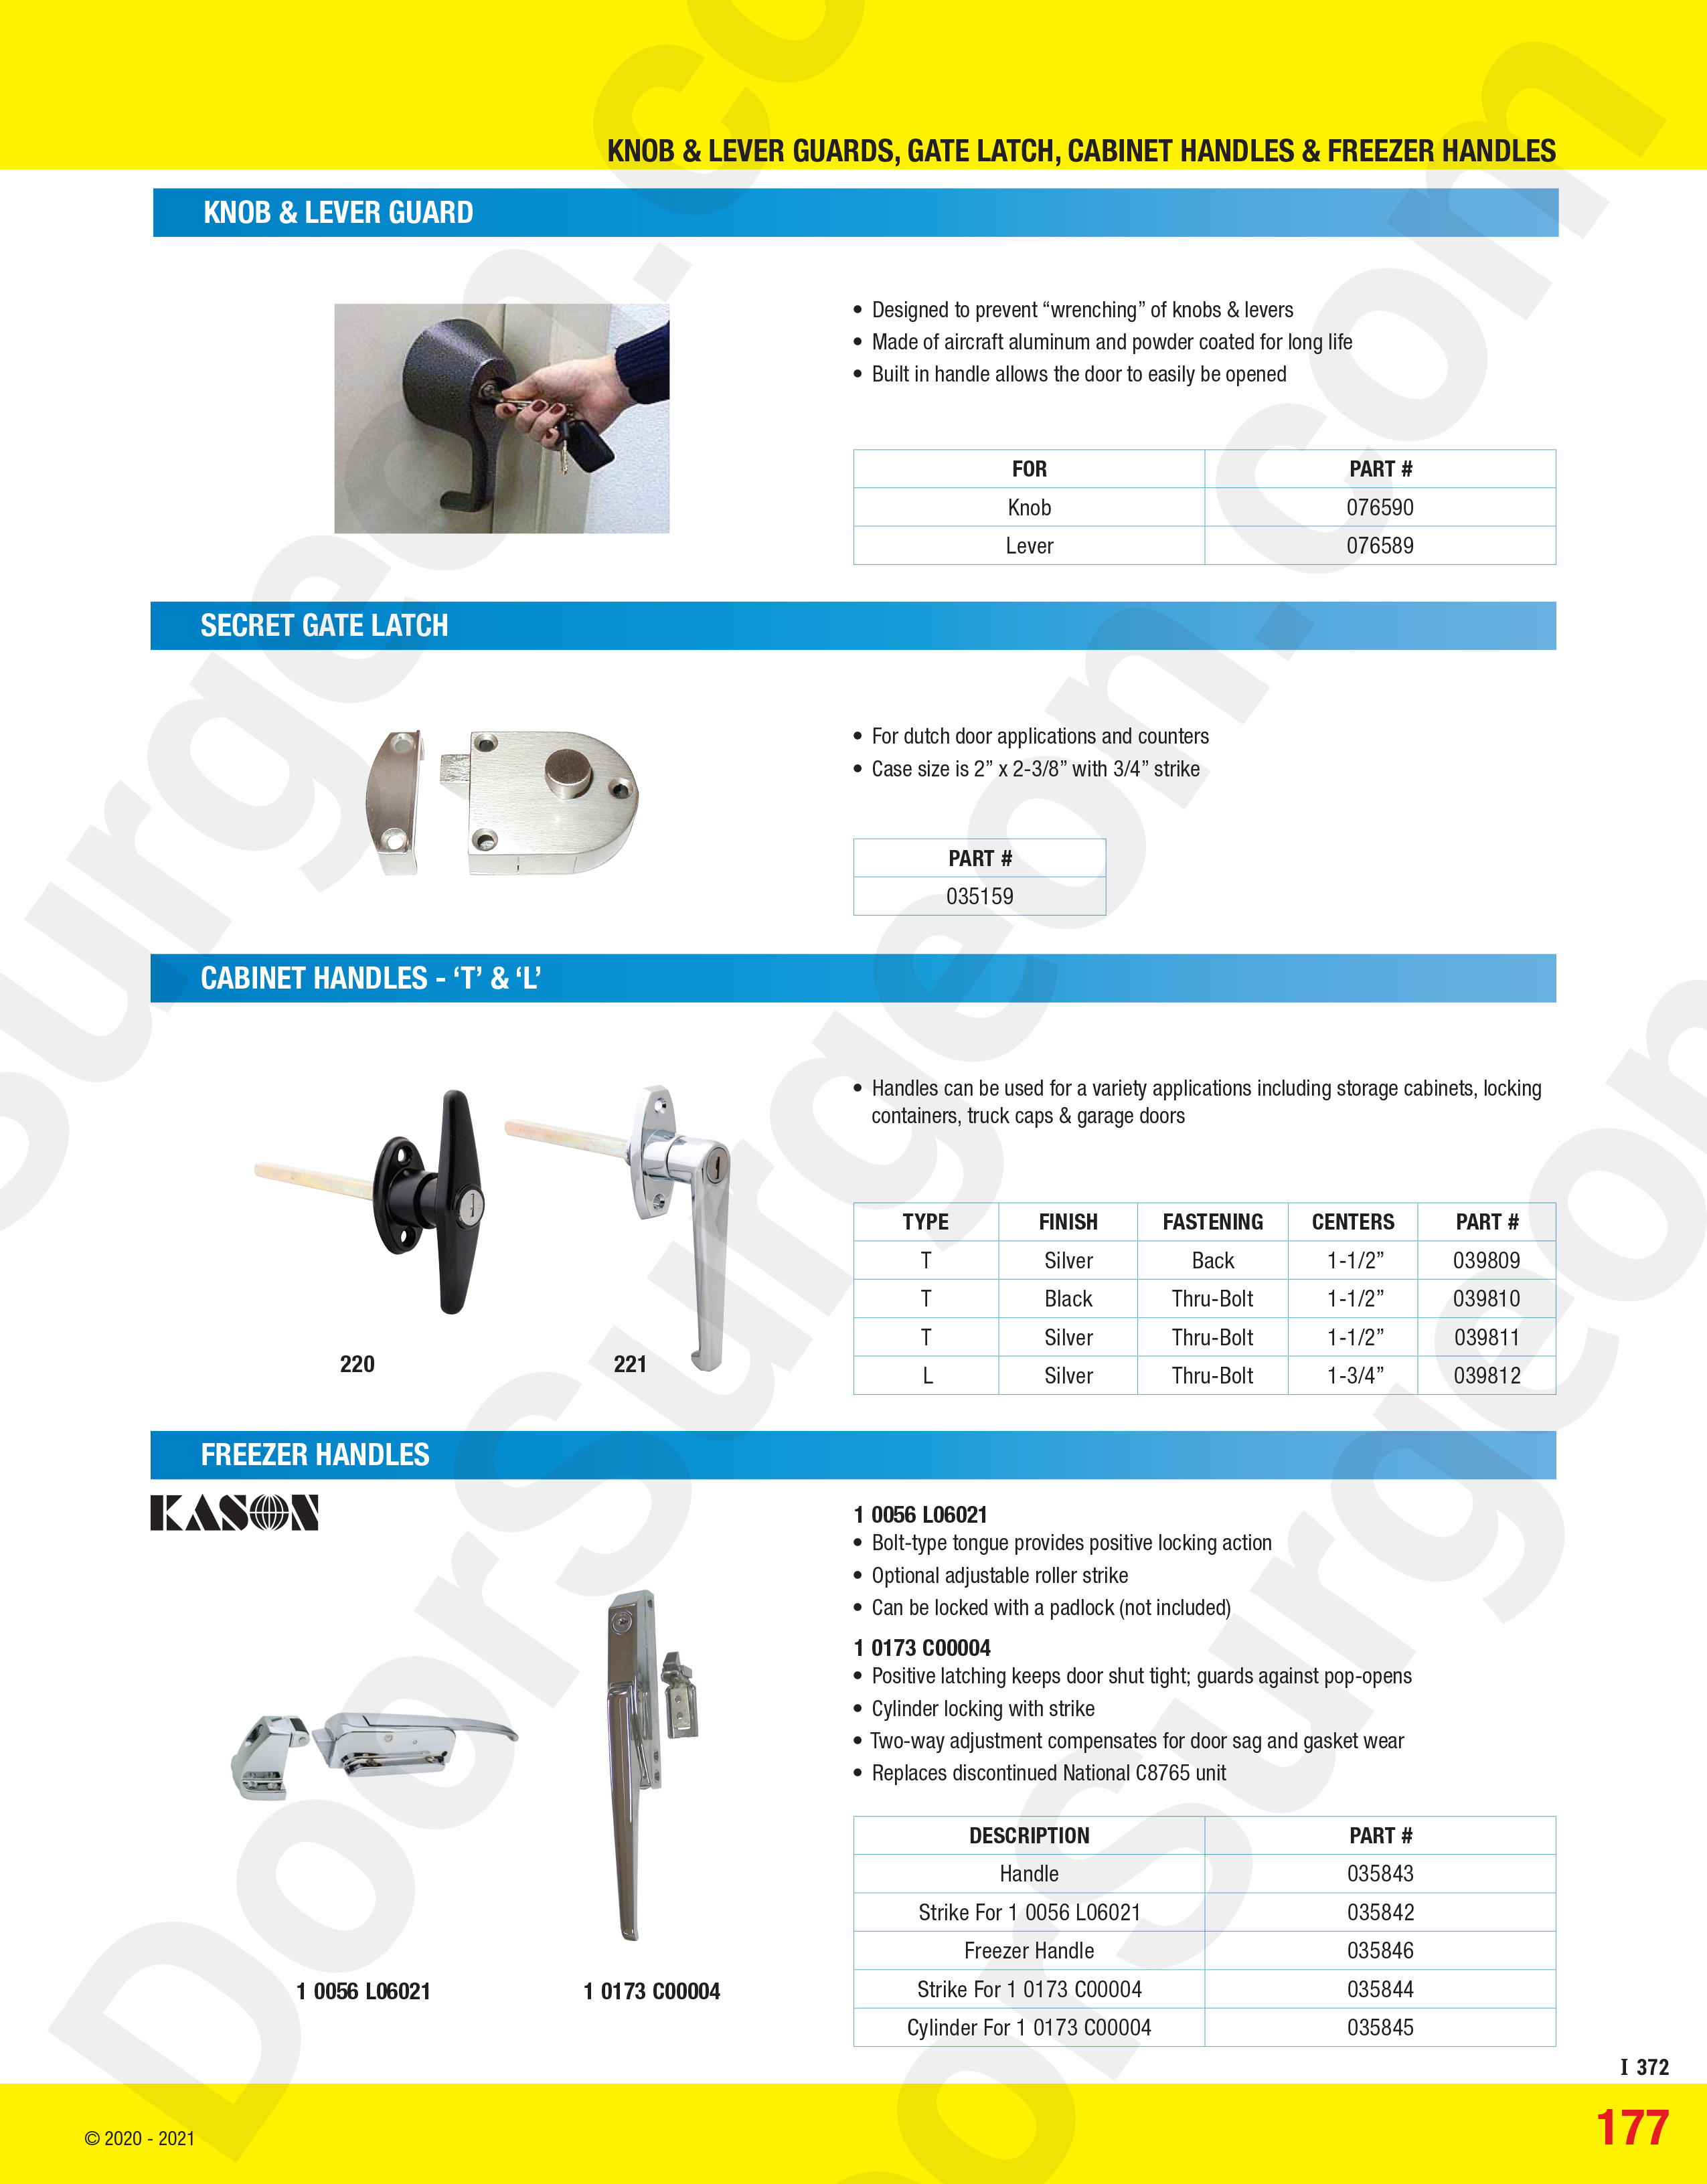 Knob and lever guard, secret gate latches, cabinet handles T and L, freezer handles